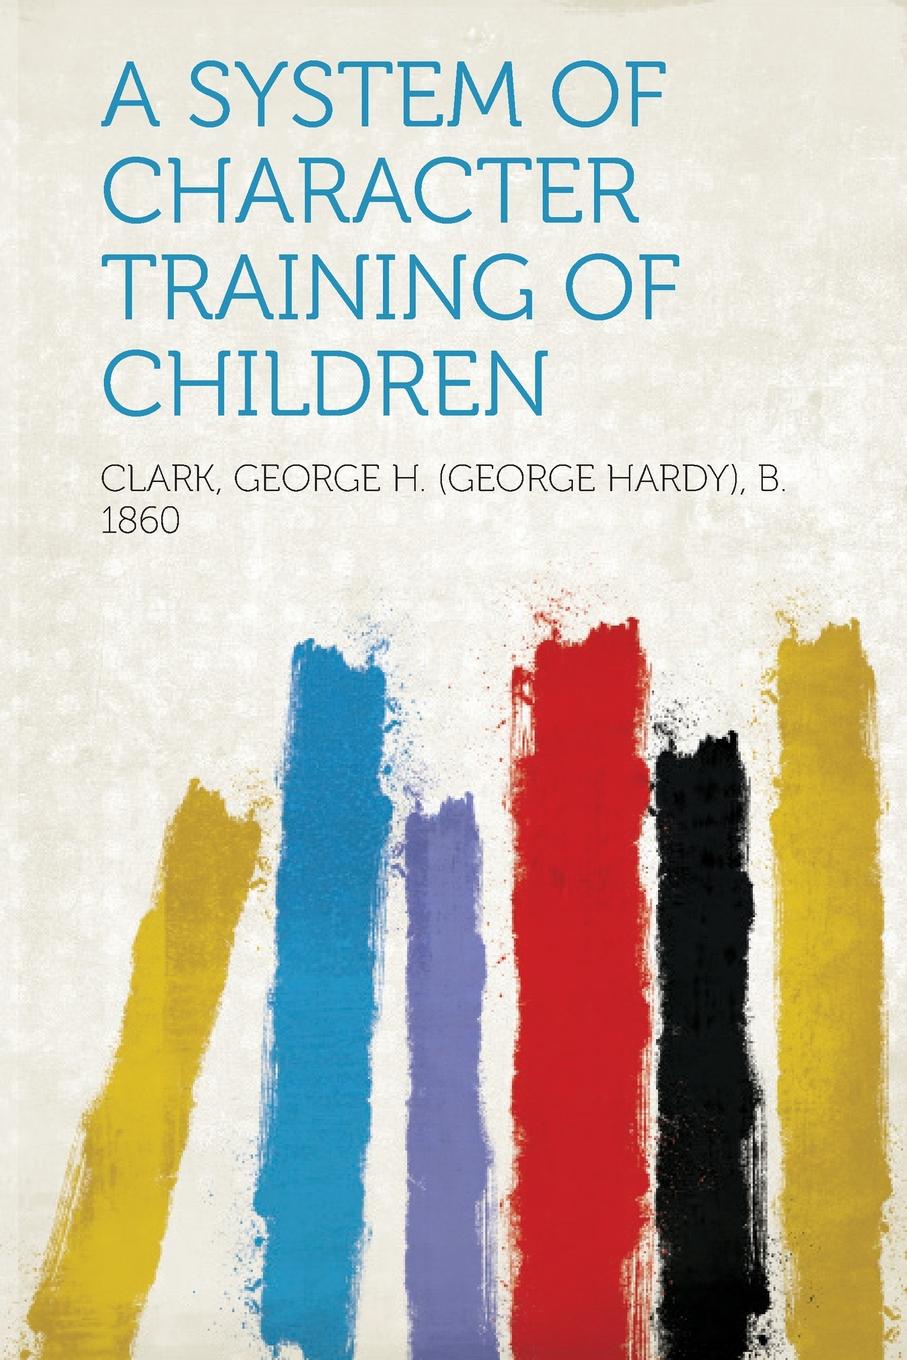 A System of Character Training of Children